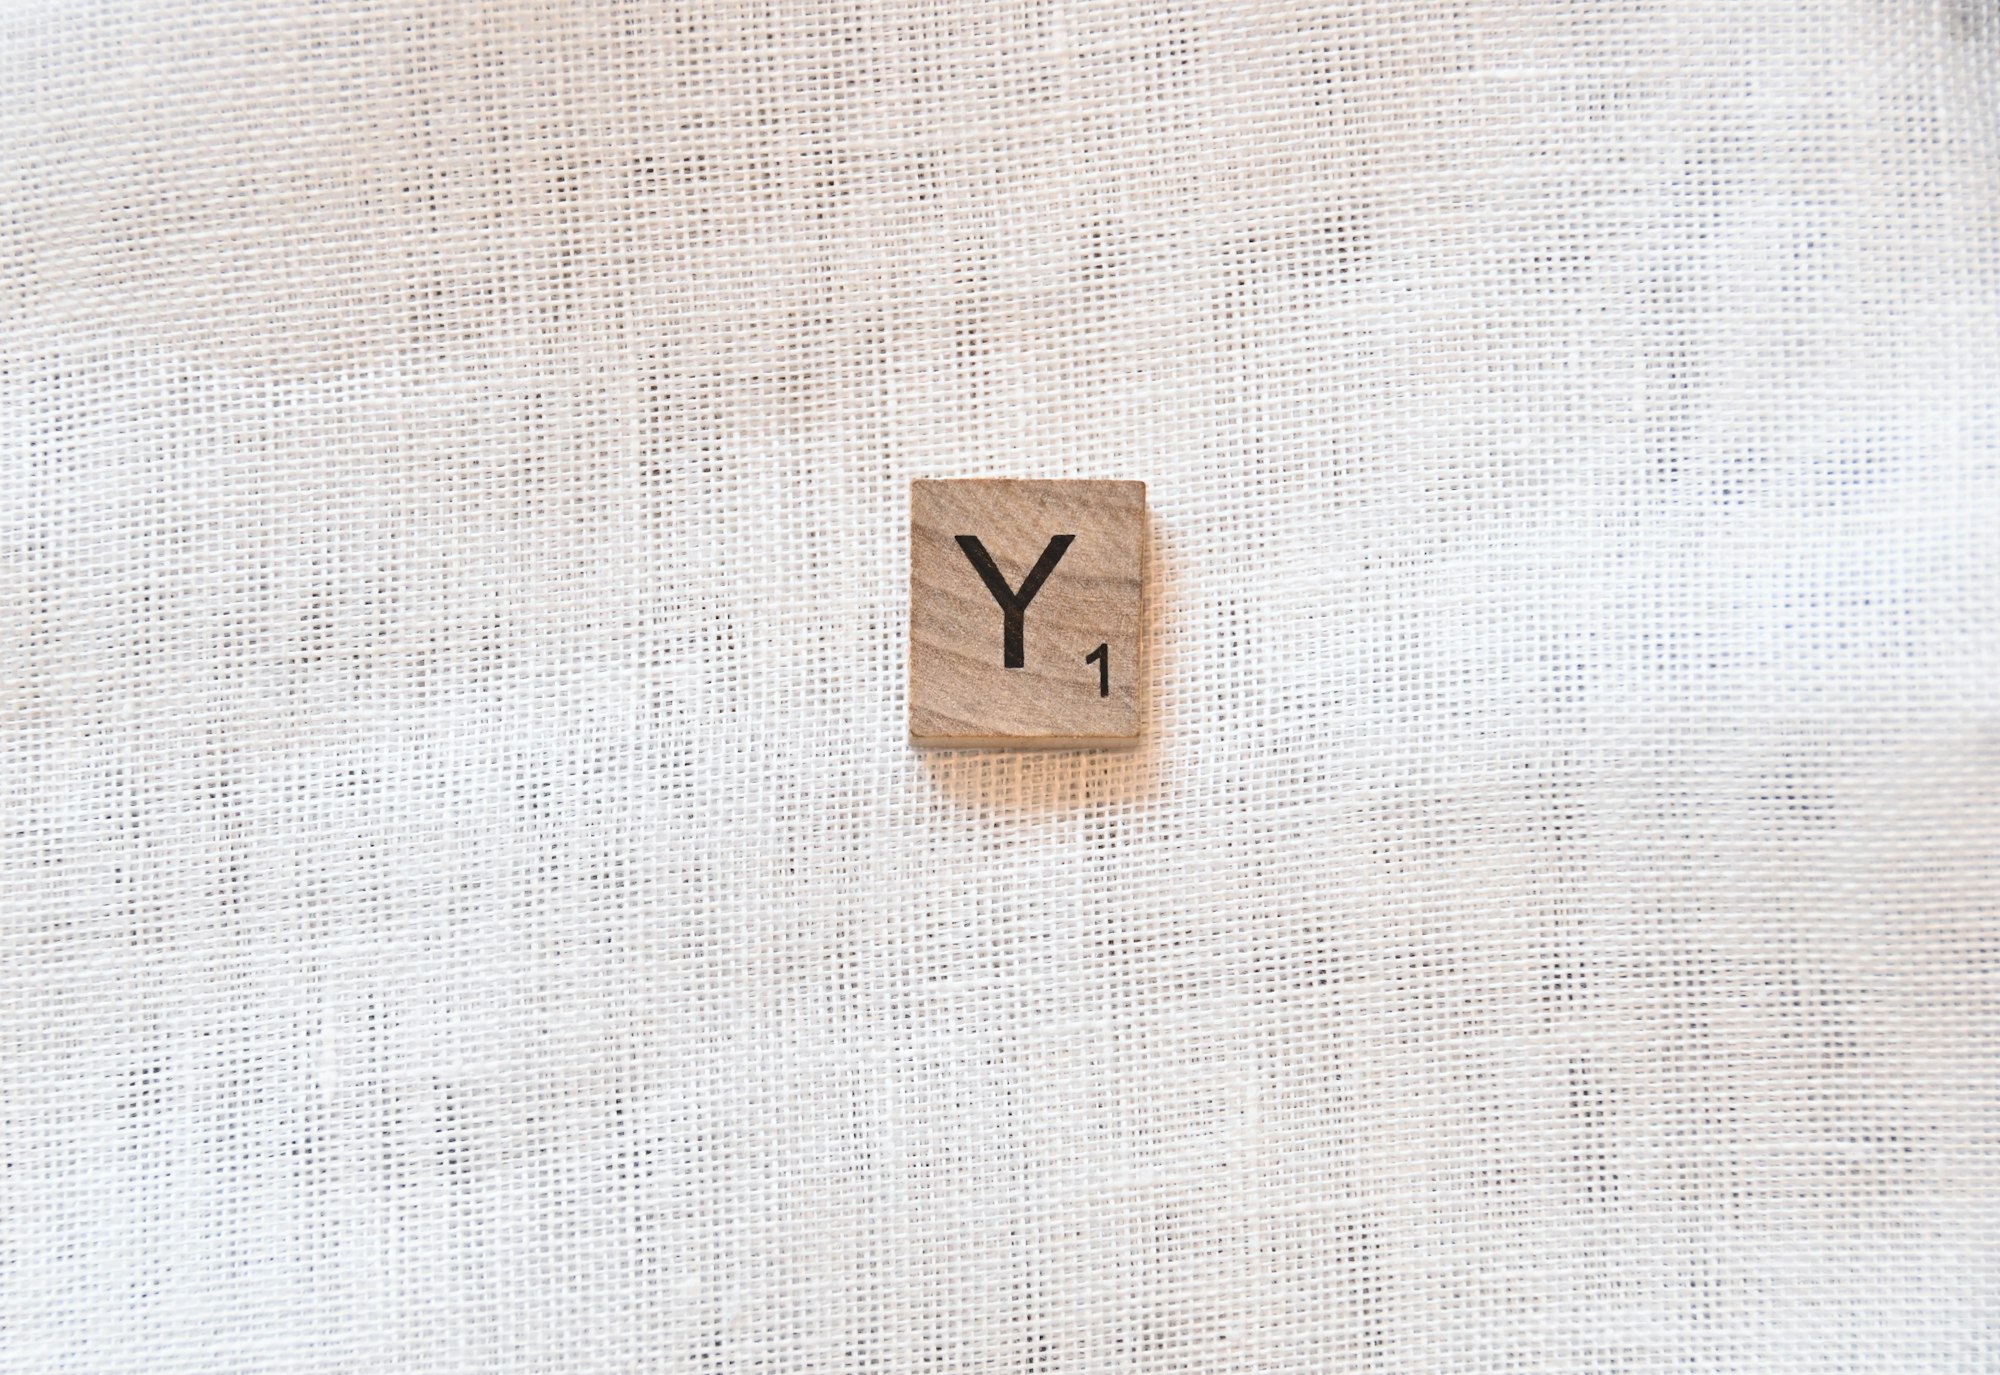 a wooden block with the word y on it